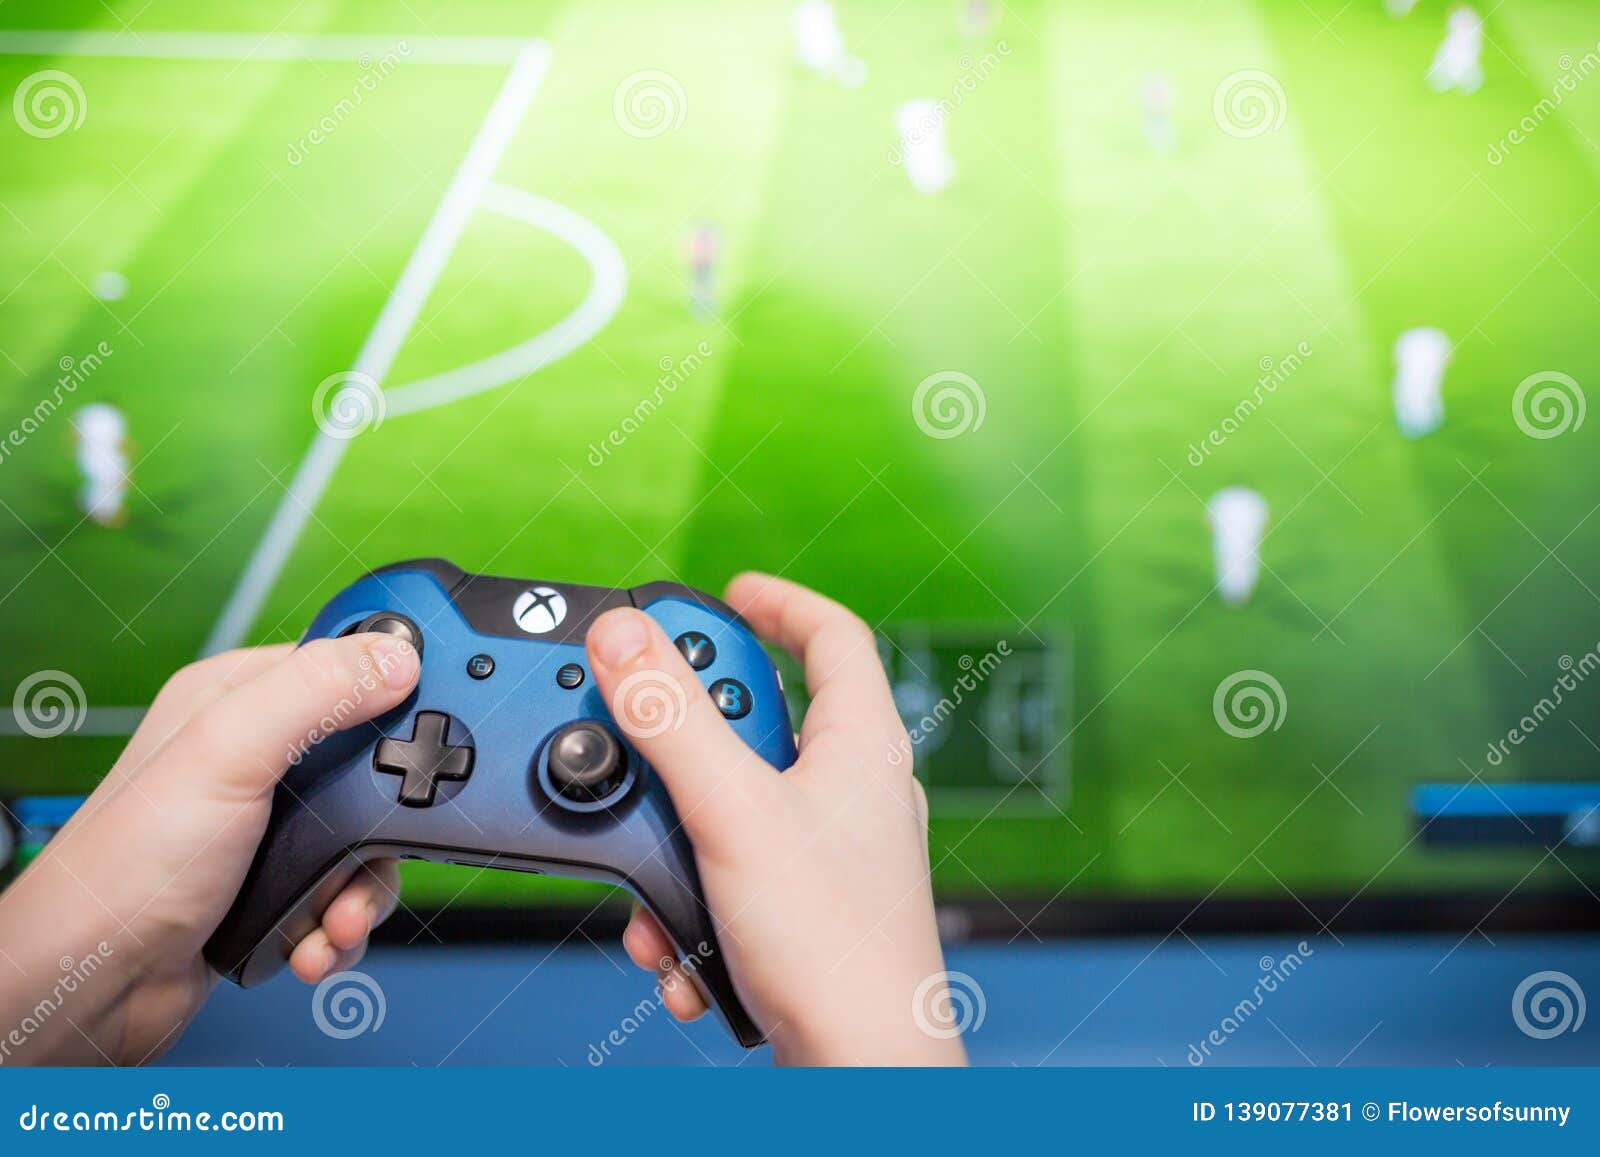 Bewusteloos Zin Uitsluiten Debrecen, Hungary, 19. November 2017 View from the Top on Xbox One S  Gamepad, Online Game Console, Kid Holding in His Hands Editorial Photo -  Image of gamer, computer: 139077381